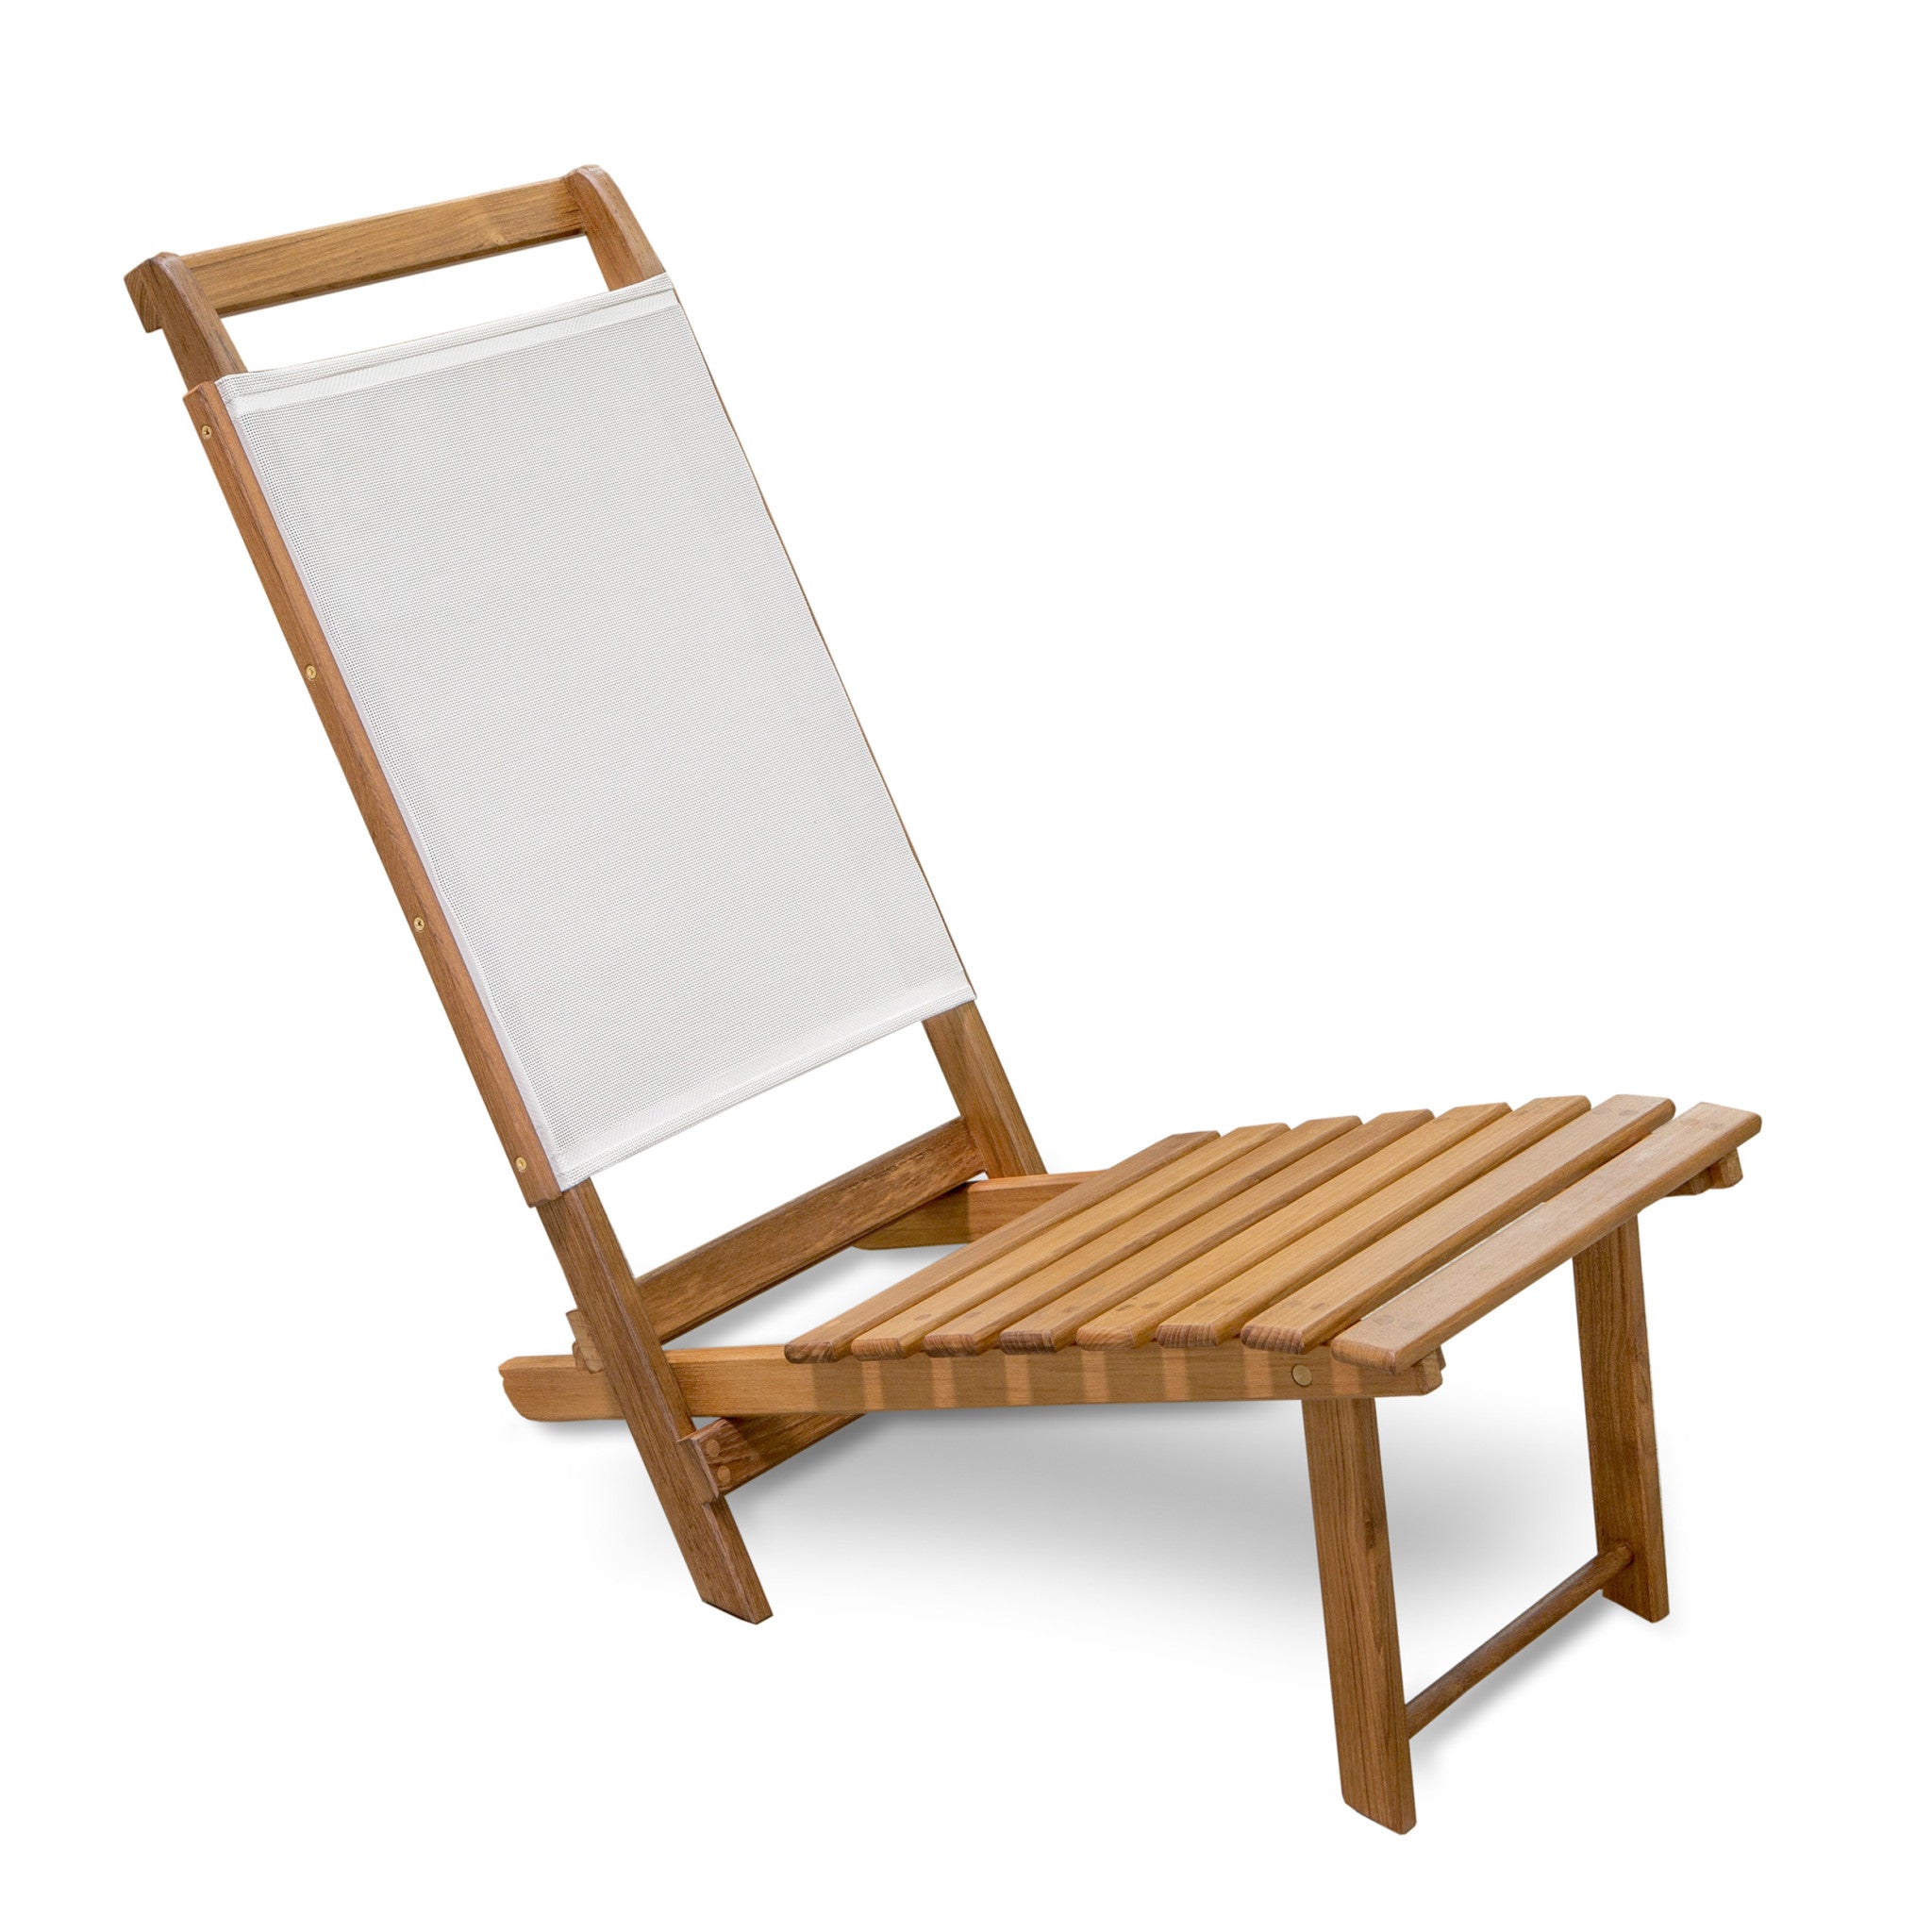 Brown-And-Brown-and-White-Solid-Wood-Deck-Chair-Outdoor-Chairs